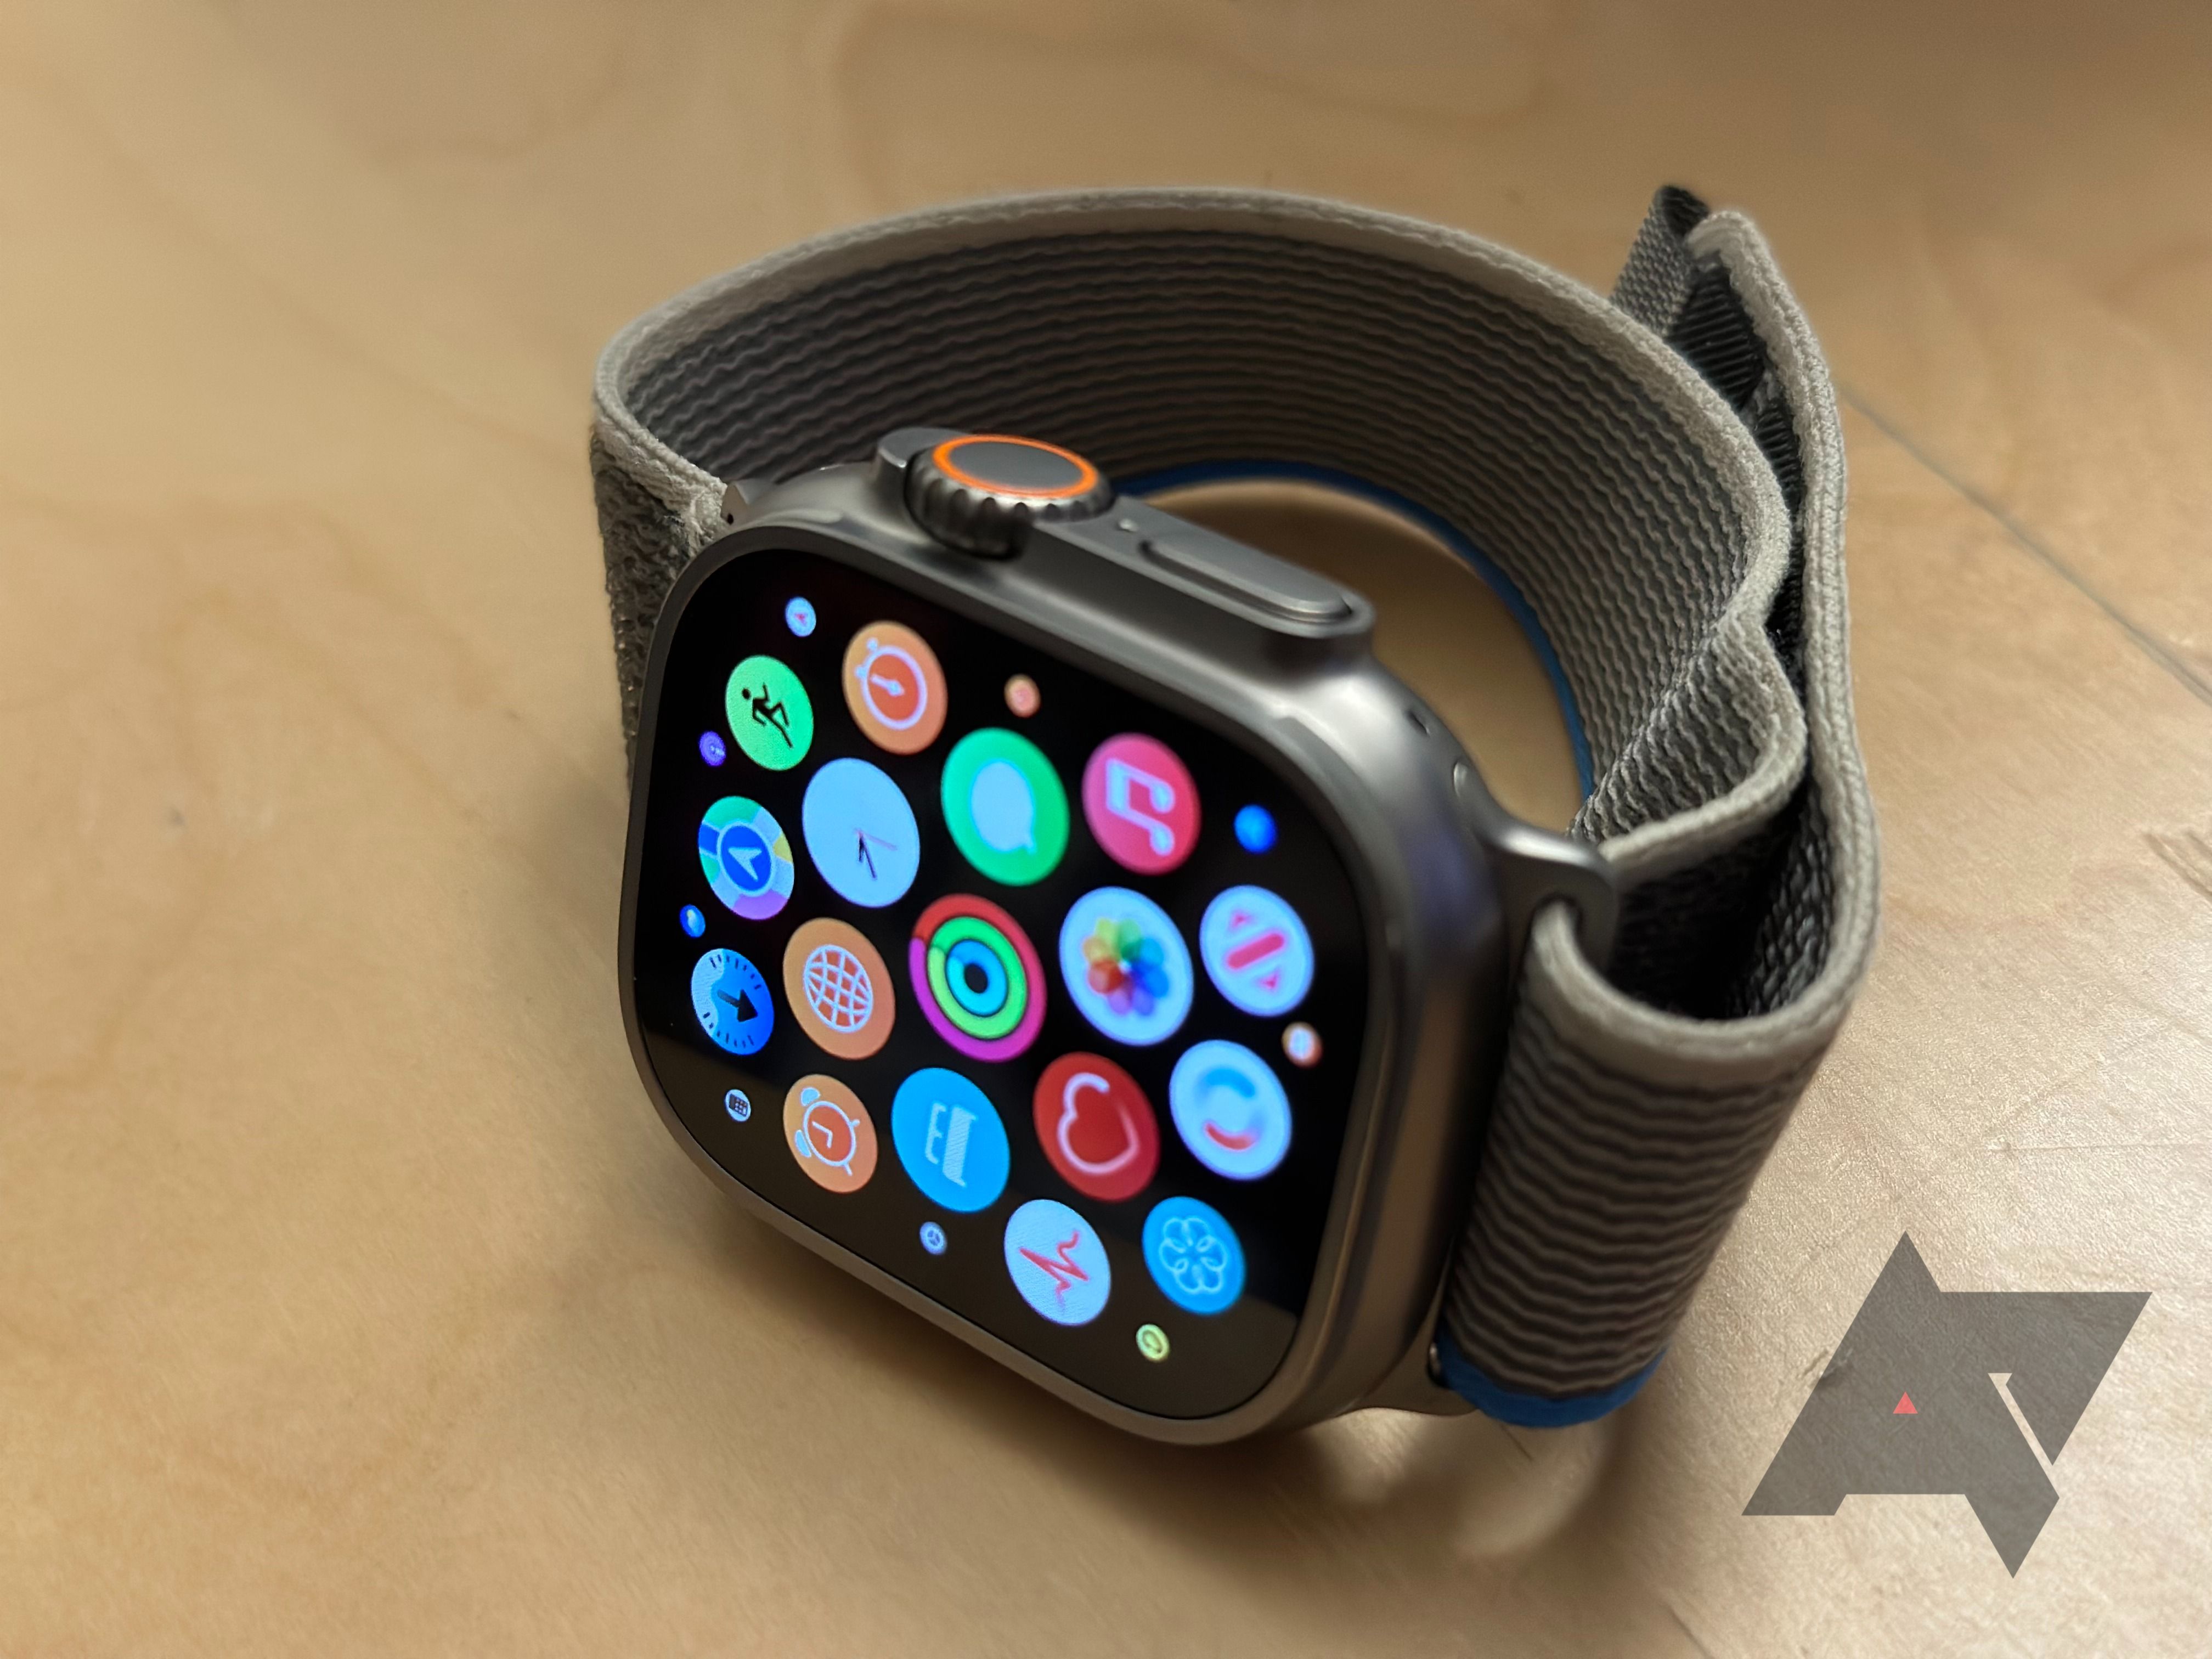 the Apple Watch Ultra on its side, with the display showing an app grid.